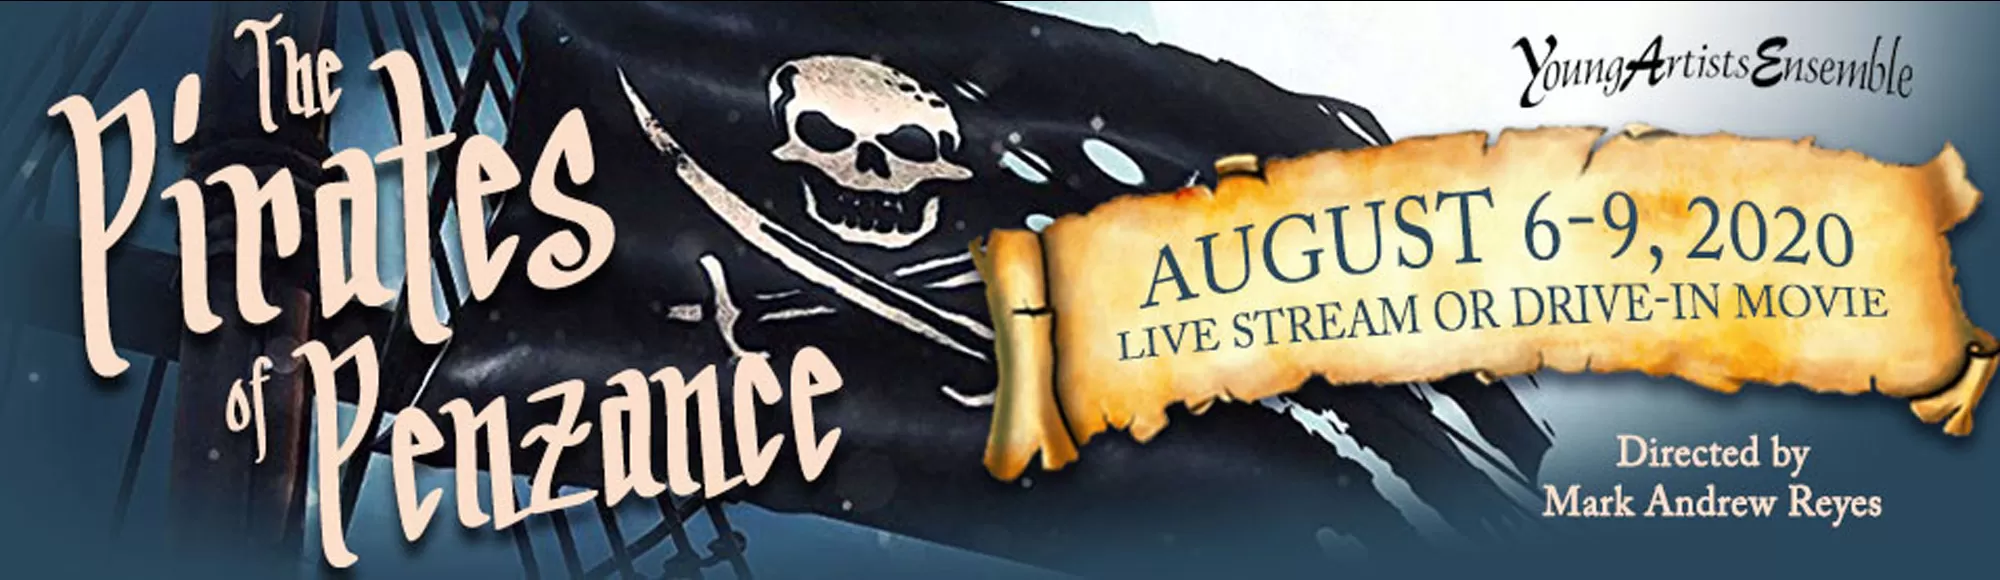 Drive-In Full Cast Live 8/8/20 The Pirates of Penzance - Live Stream